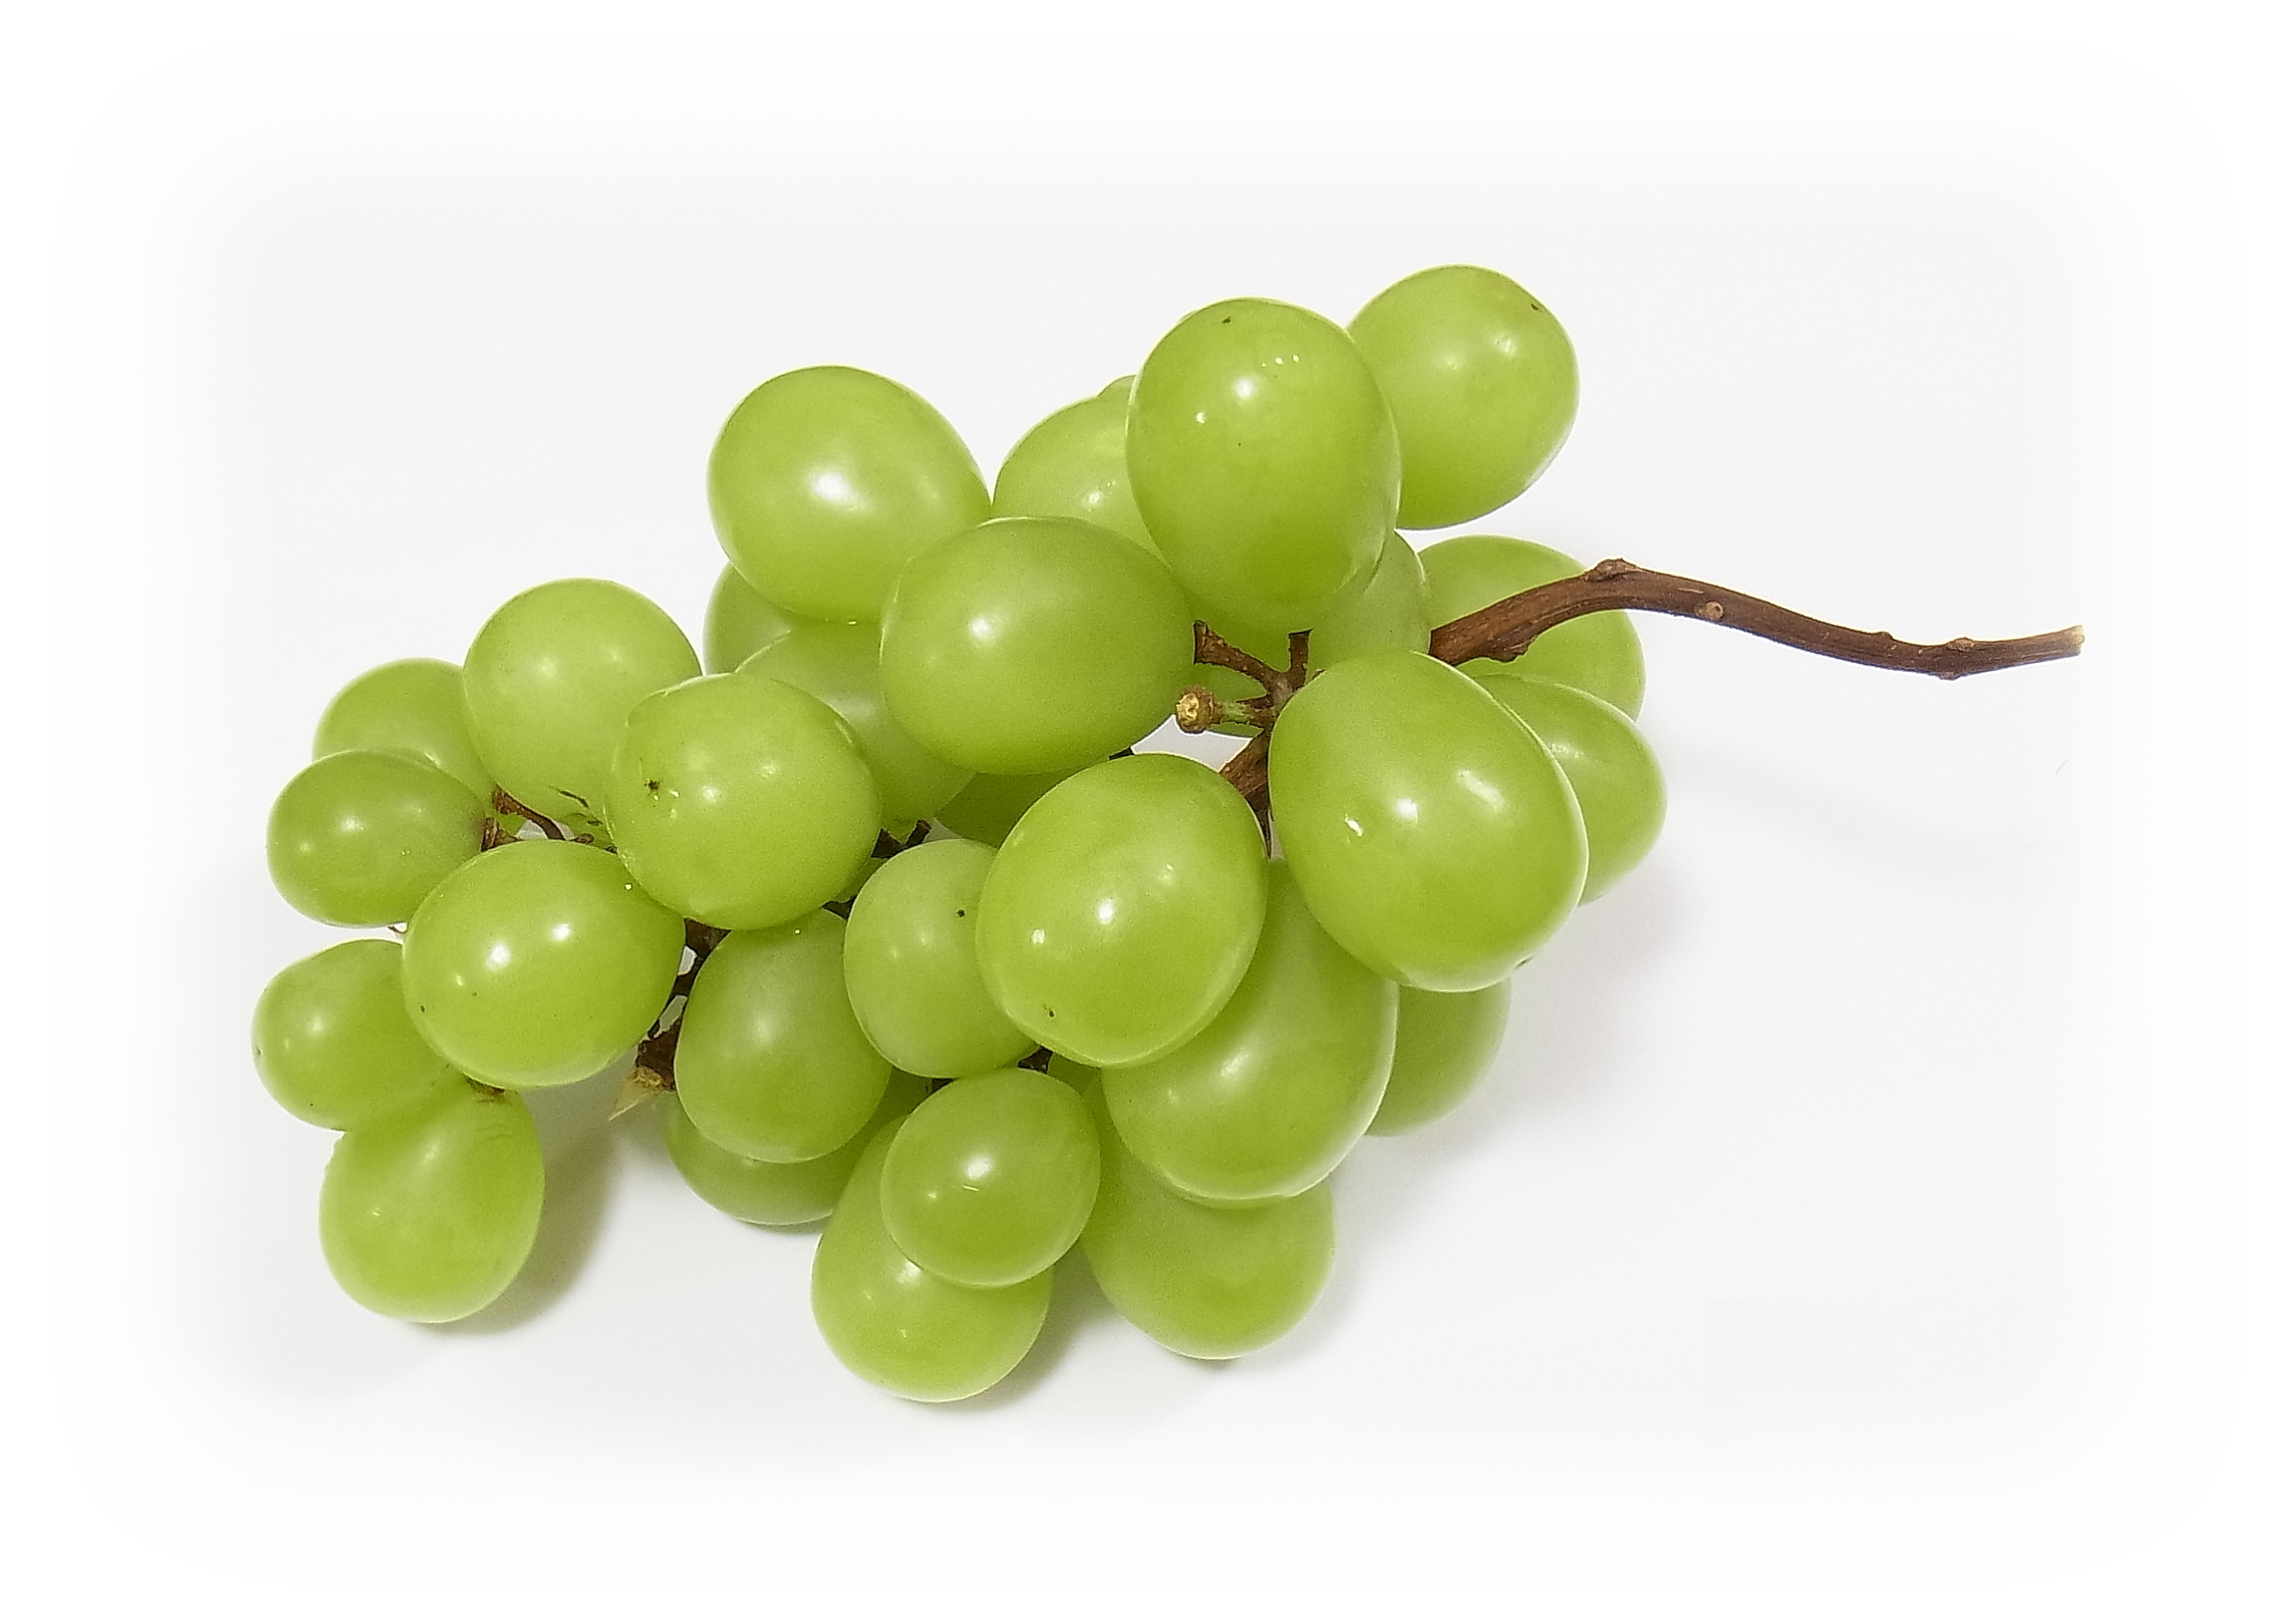 Beautiful green grapes of the Shine Muscat